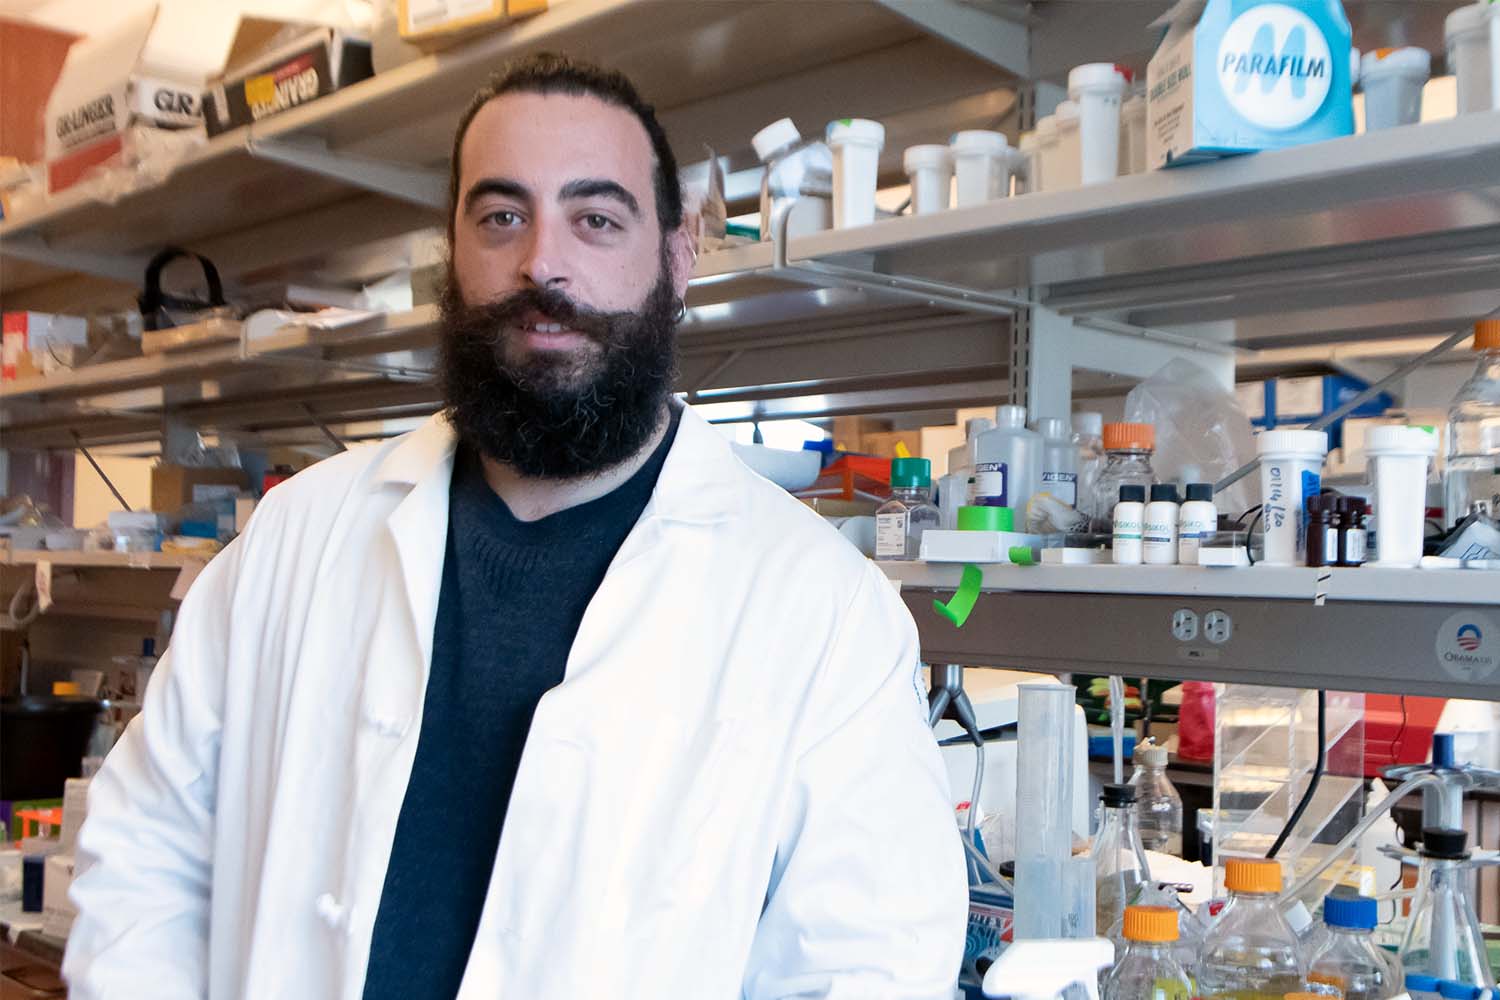 Sergio Juarez-Carreño, Ph.D., a CRI Postdoctoral Fellow in the lab of Frederic Geissmann, M.D., Ph.D., at Memorial Sloan Kettering Cancer Center, is studying the role and activity of immune cells called macrophages in response to stress hormones involved in tumor development.